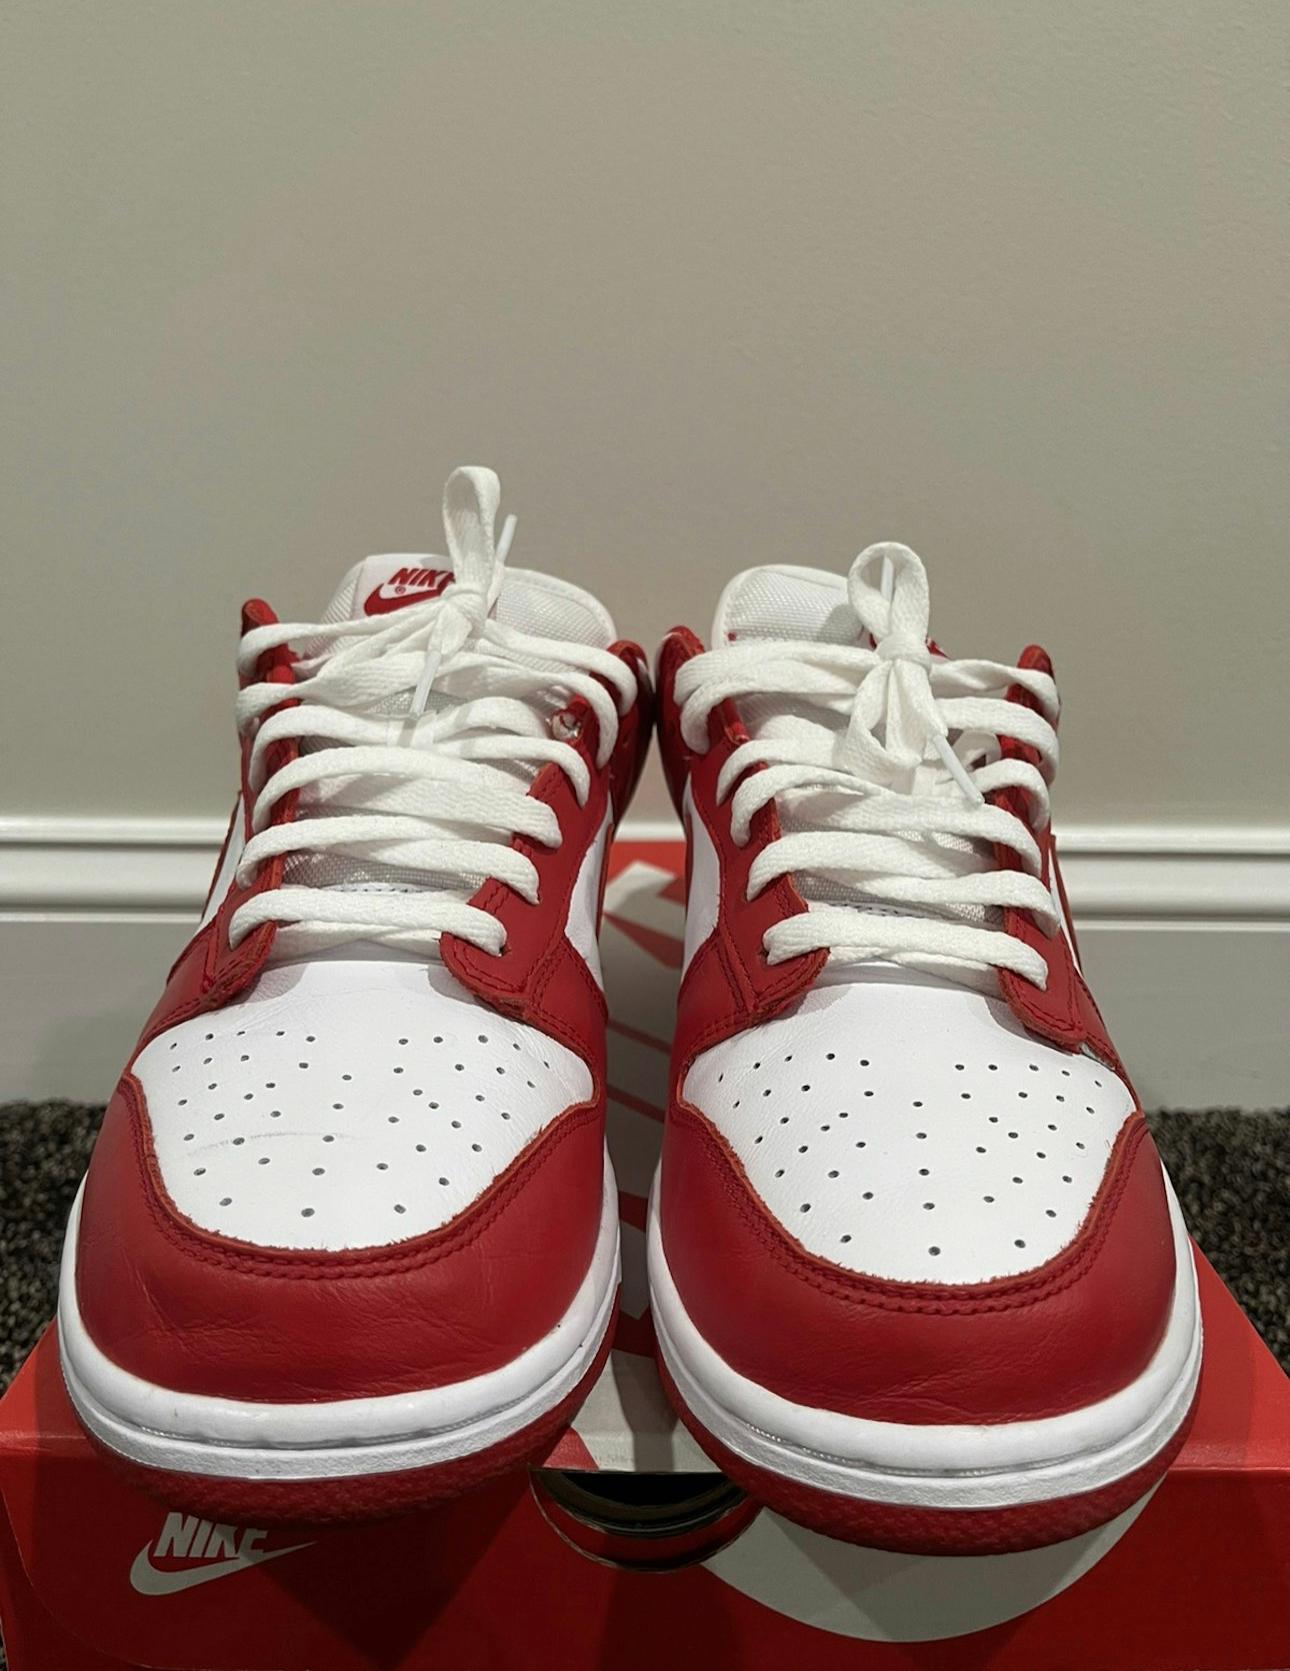 Nike Dunk Low Retro SP “St. John’s” Red Varsity In Excellent Condition For Sale In Bear, DE